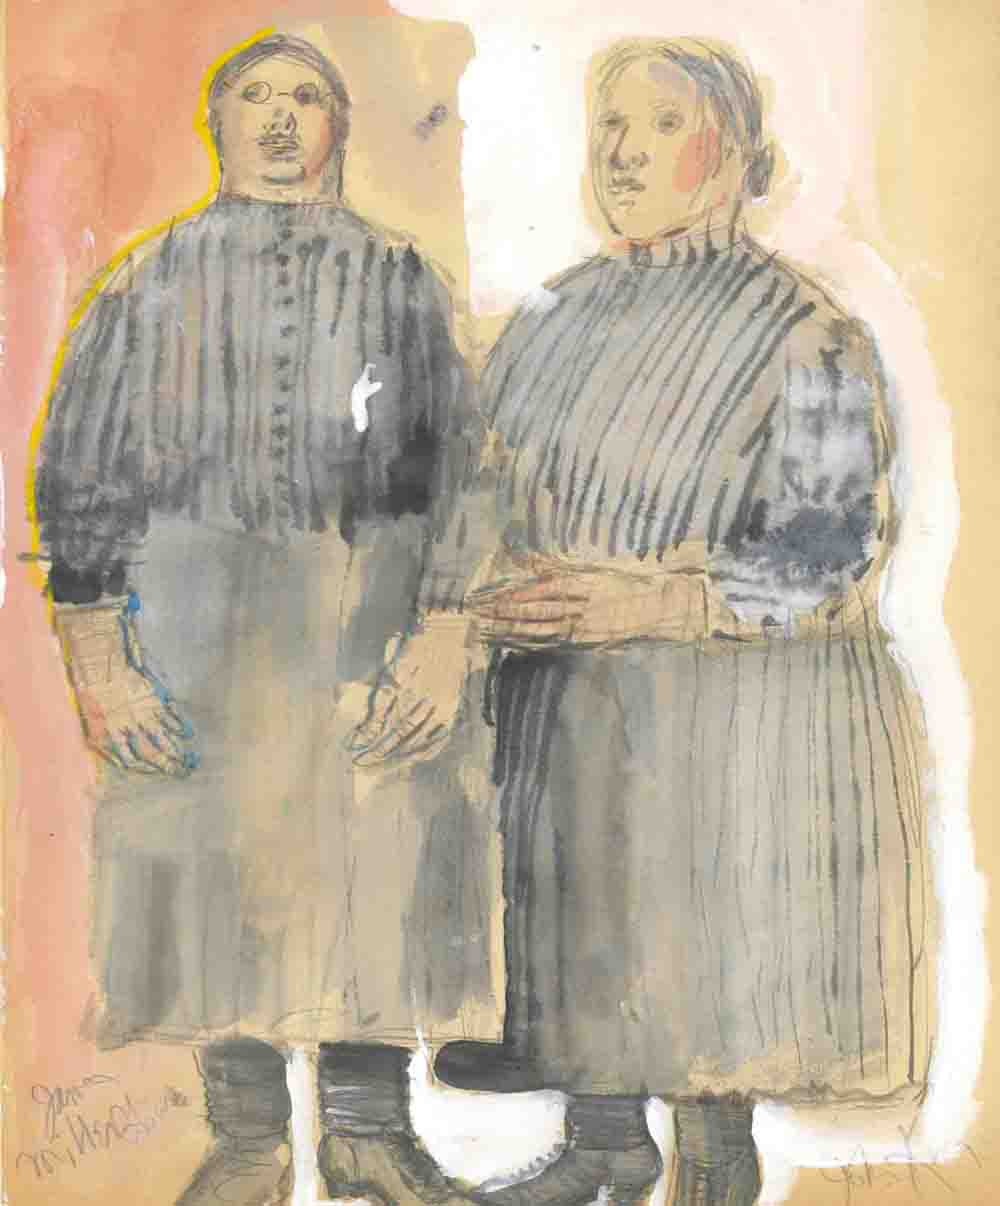 Sketch for James Miller and John King as Ensemble (Men dressed as Women), Wozzeck Gesso/ Graphite/ Watercolor/ Gouache on Paper, 14 x 17 inches